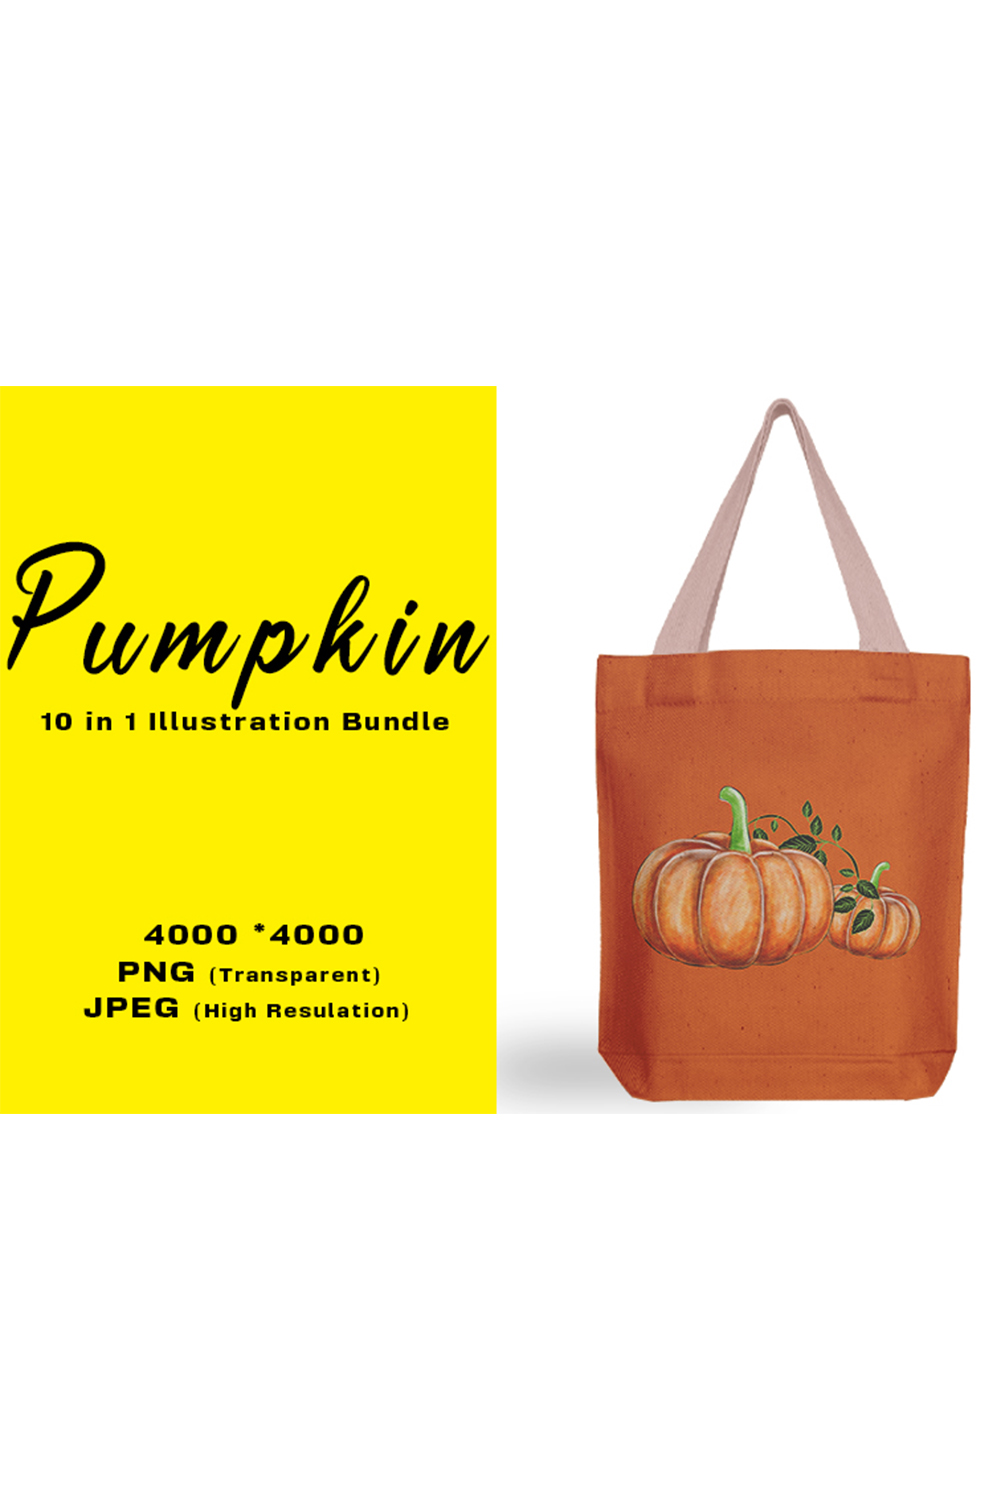 Image of a bag with a gorgeous pumpkin print